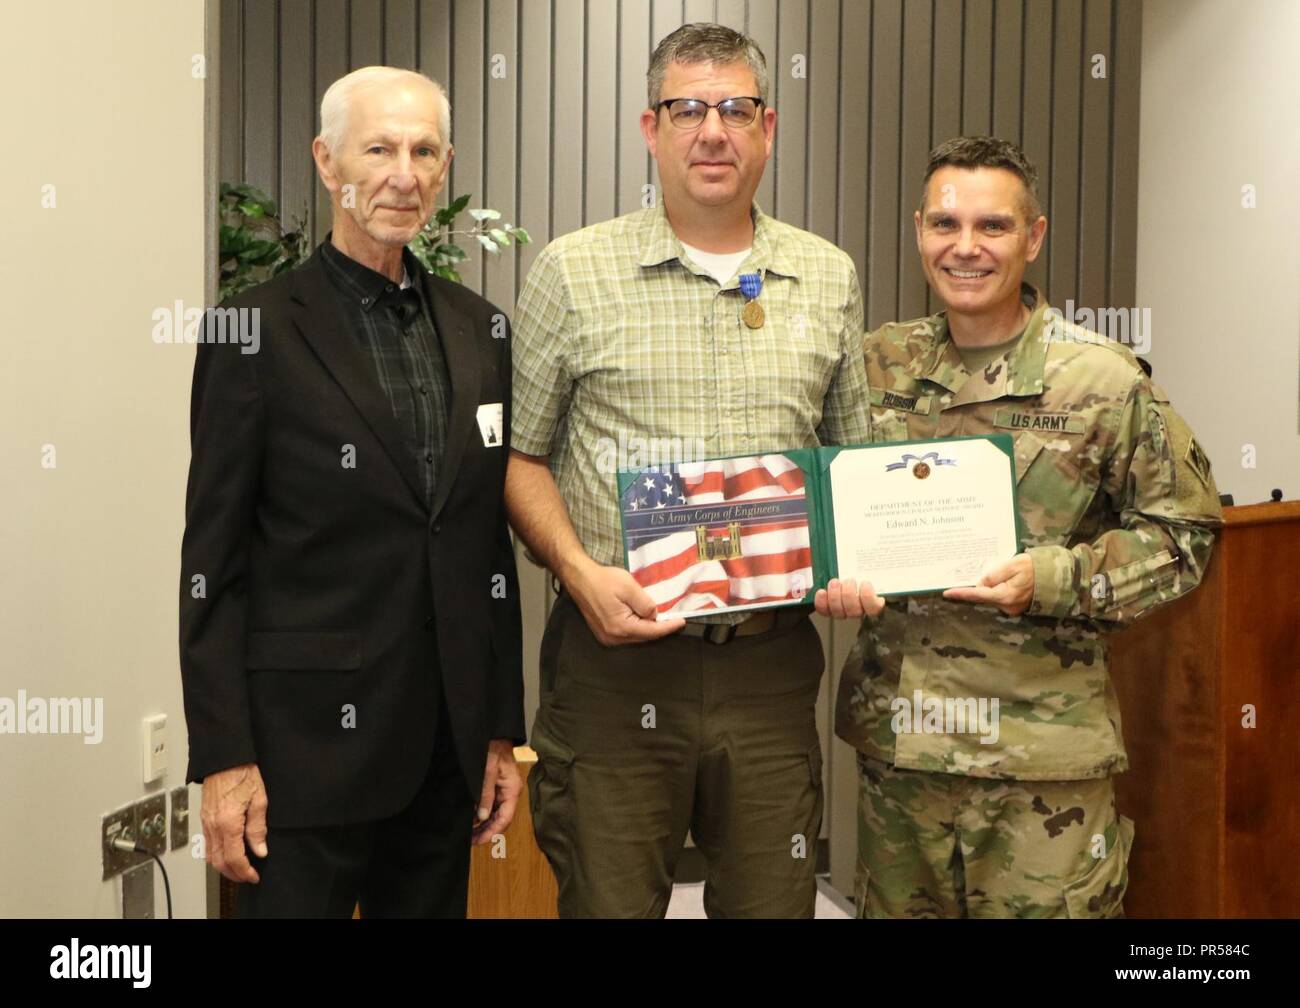 Col. Christopher A Hussin, Commander, U.S. Army Corps of Engineers, Tulsa District, presents Edward N. Johnson (center) the Meritorious Civilian Service Award for his performance while serving as a senior strategic communications advisor to Ukraine’s Minster of Defense from 2016 to 2017. Johnson’s father Harvey (left) was also in attendance during the ceremony. The Meritorious Civilian Service Award is the second highest award granted by the Secretary of the Army or a major Army commander to civilian personnel. Stock Photo